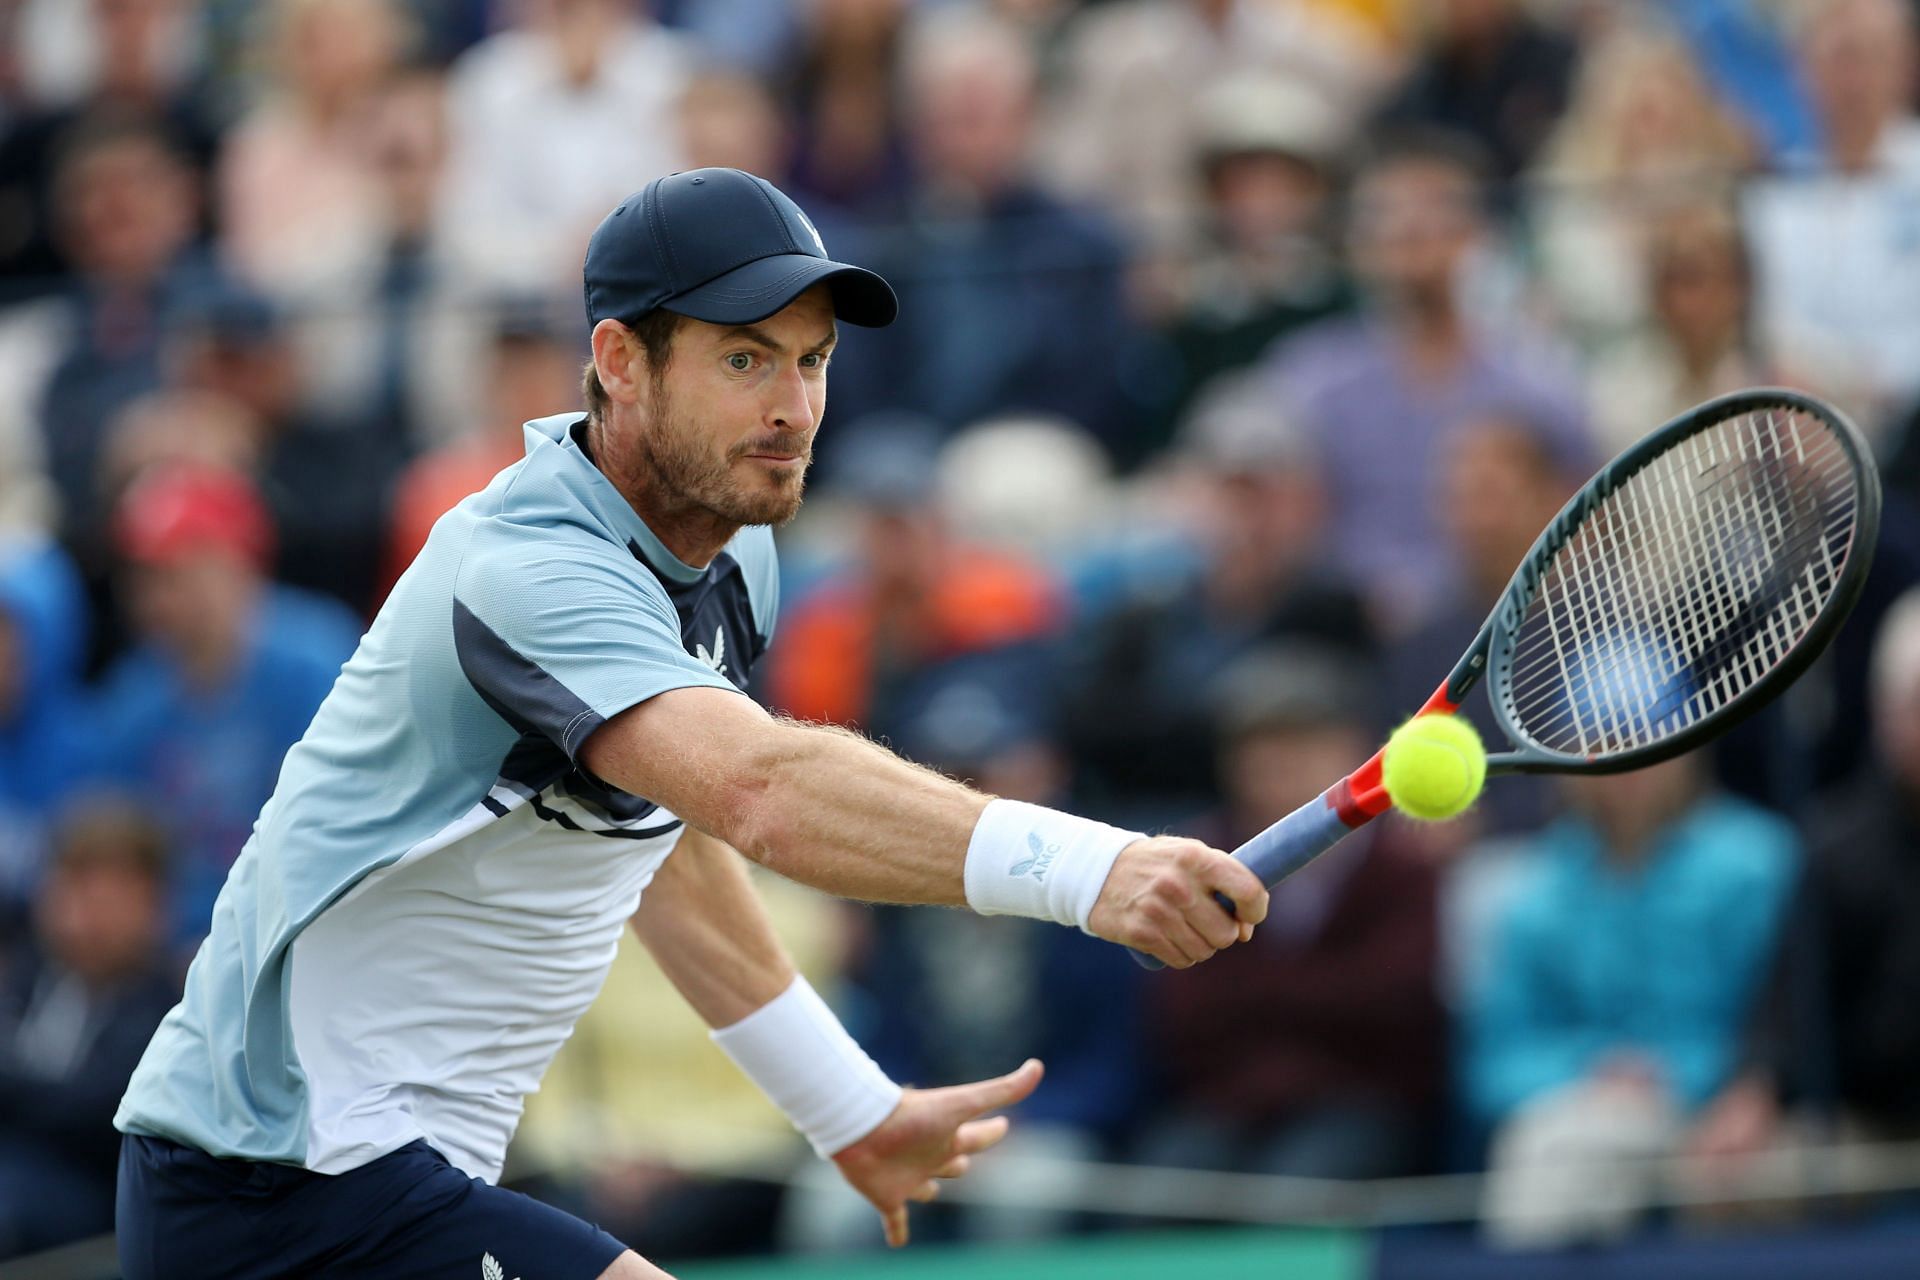 Andy Murray kicked off his grasscourt season on a positive note